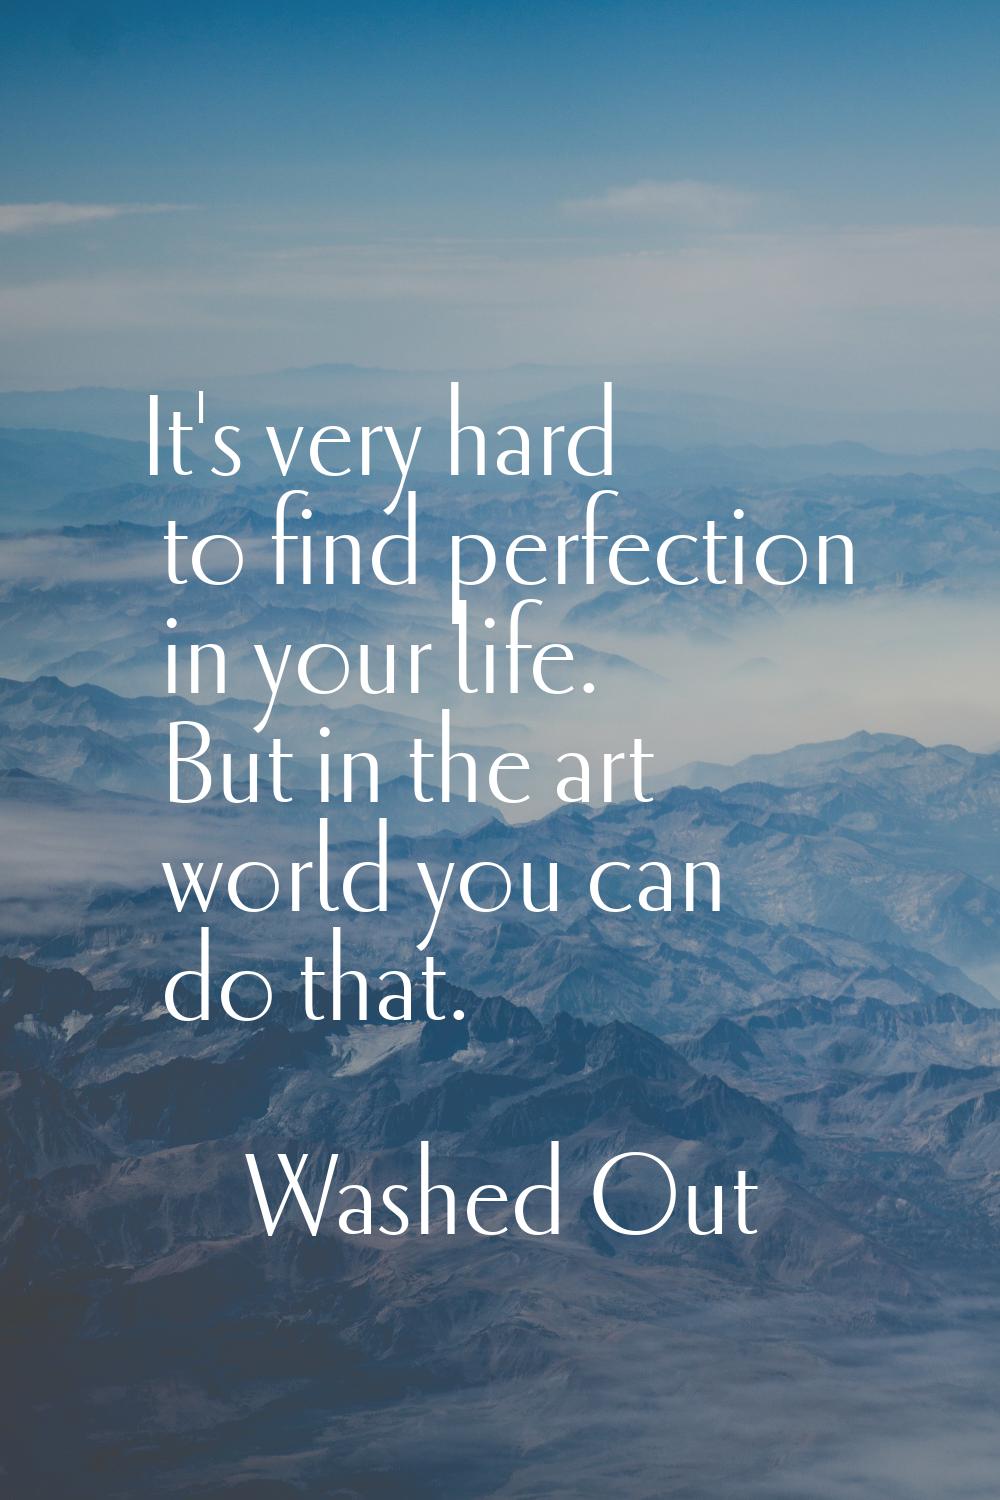 It's very hard to find perfection in your life. But in the art world you can do that.